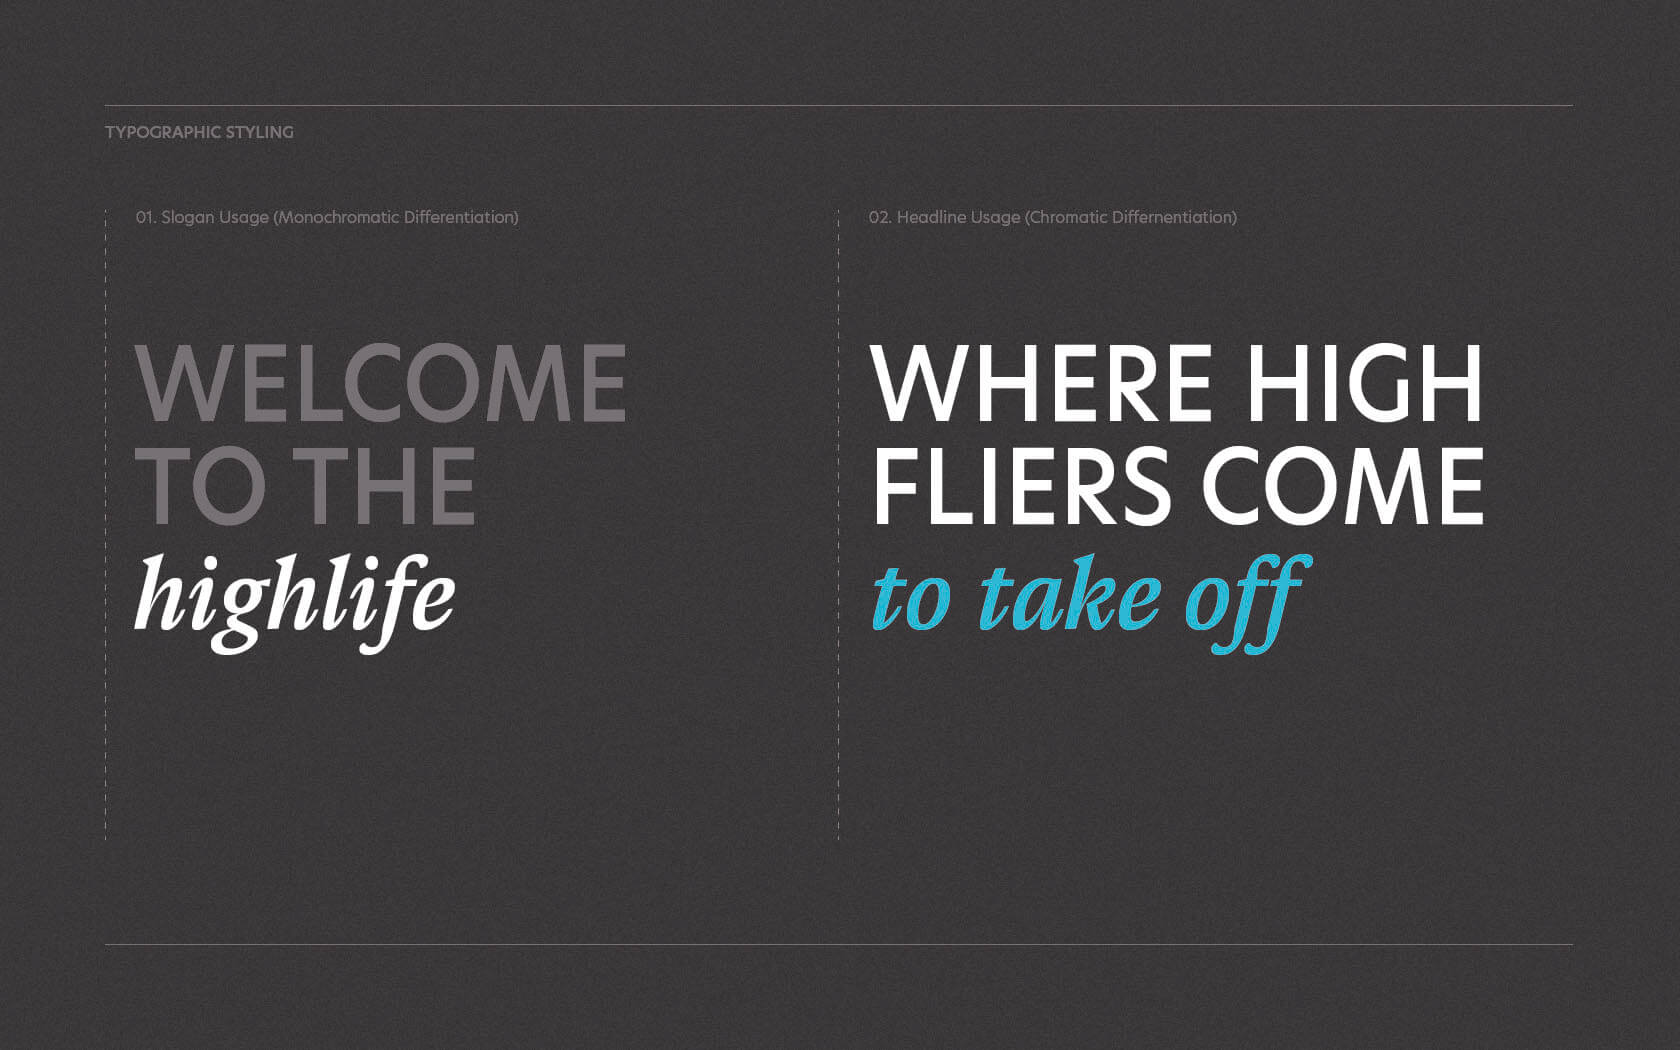 Harbour Height. Typographic styling